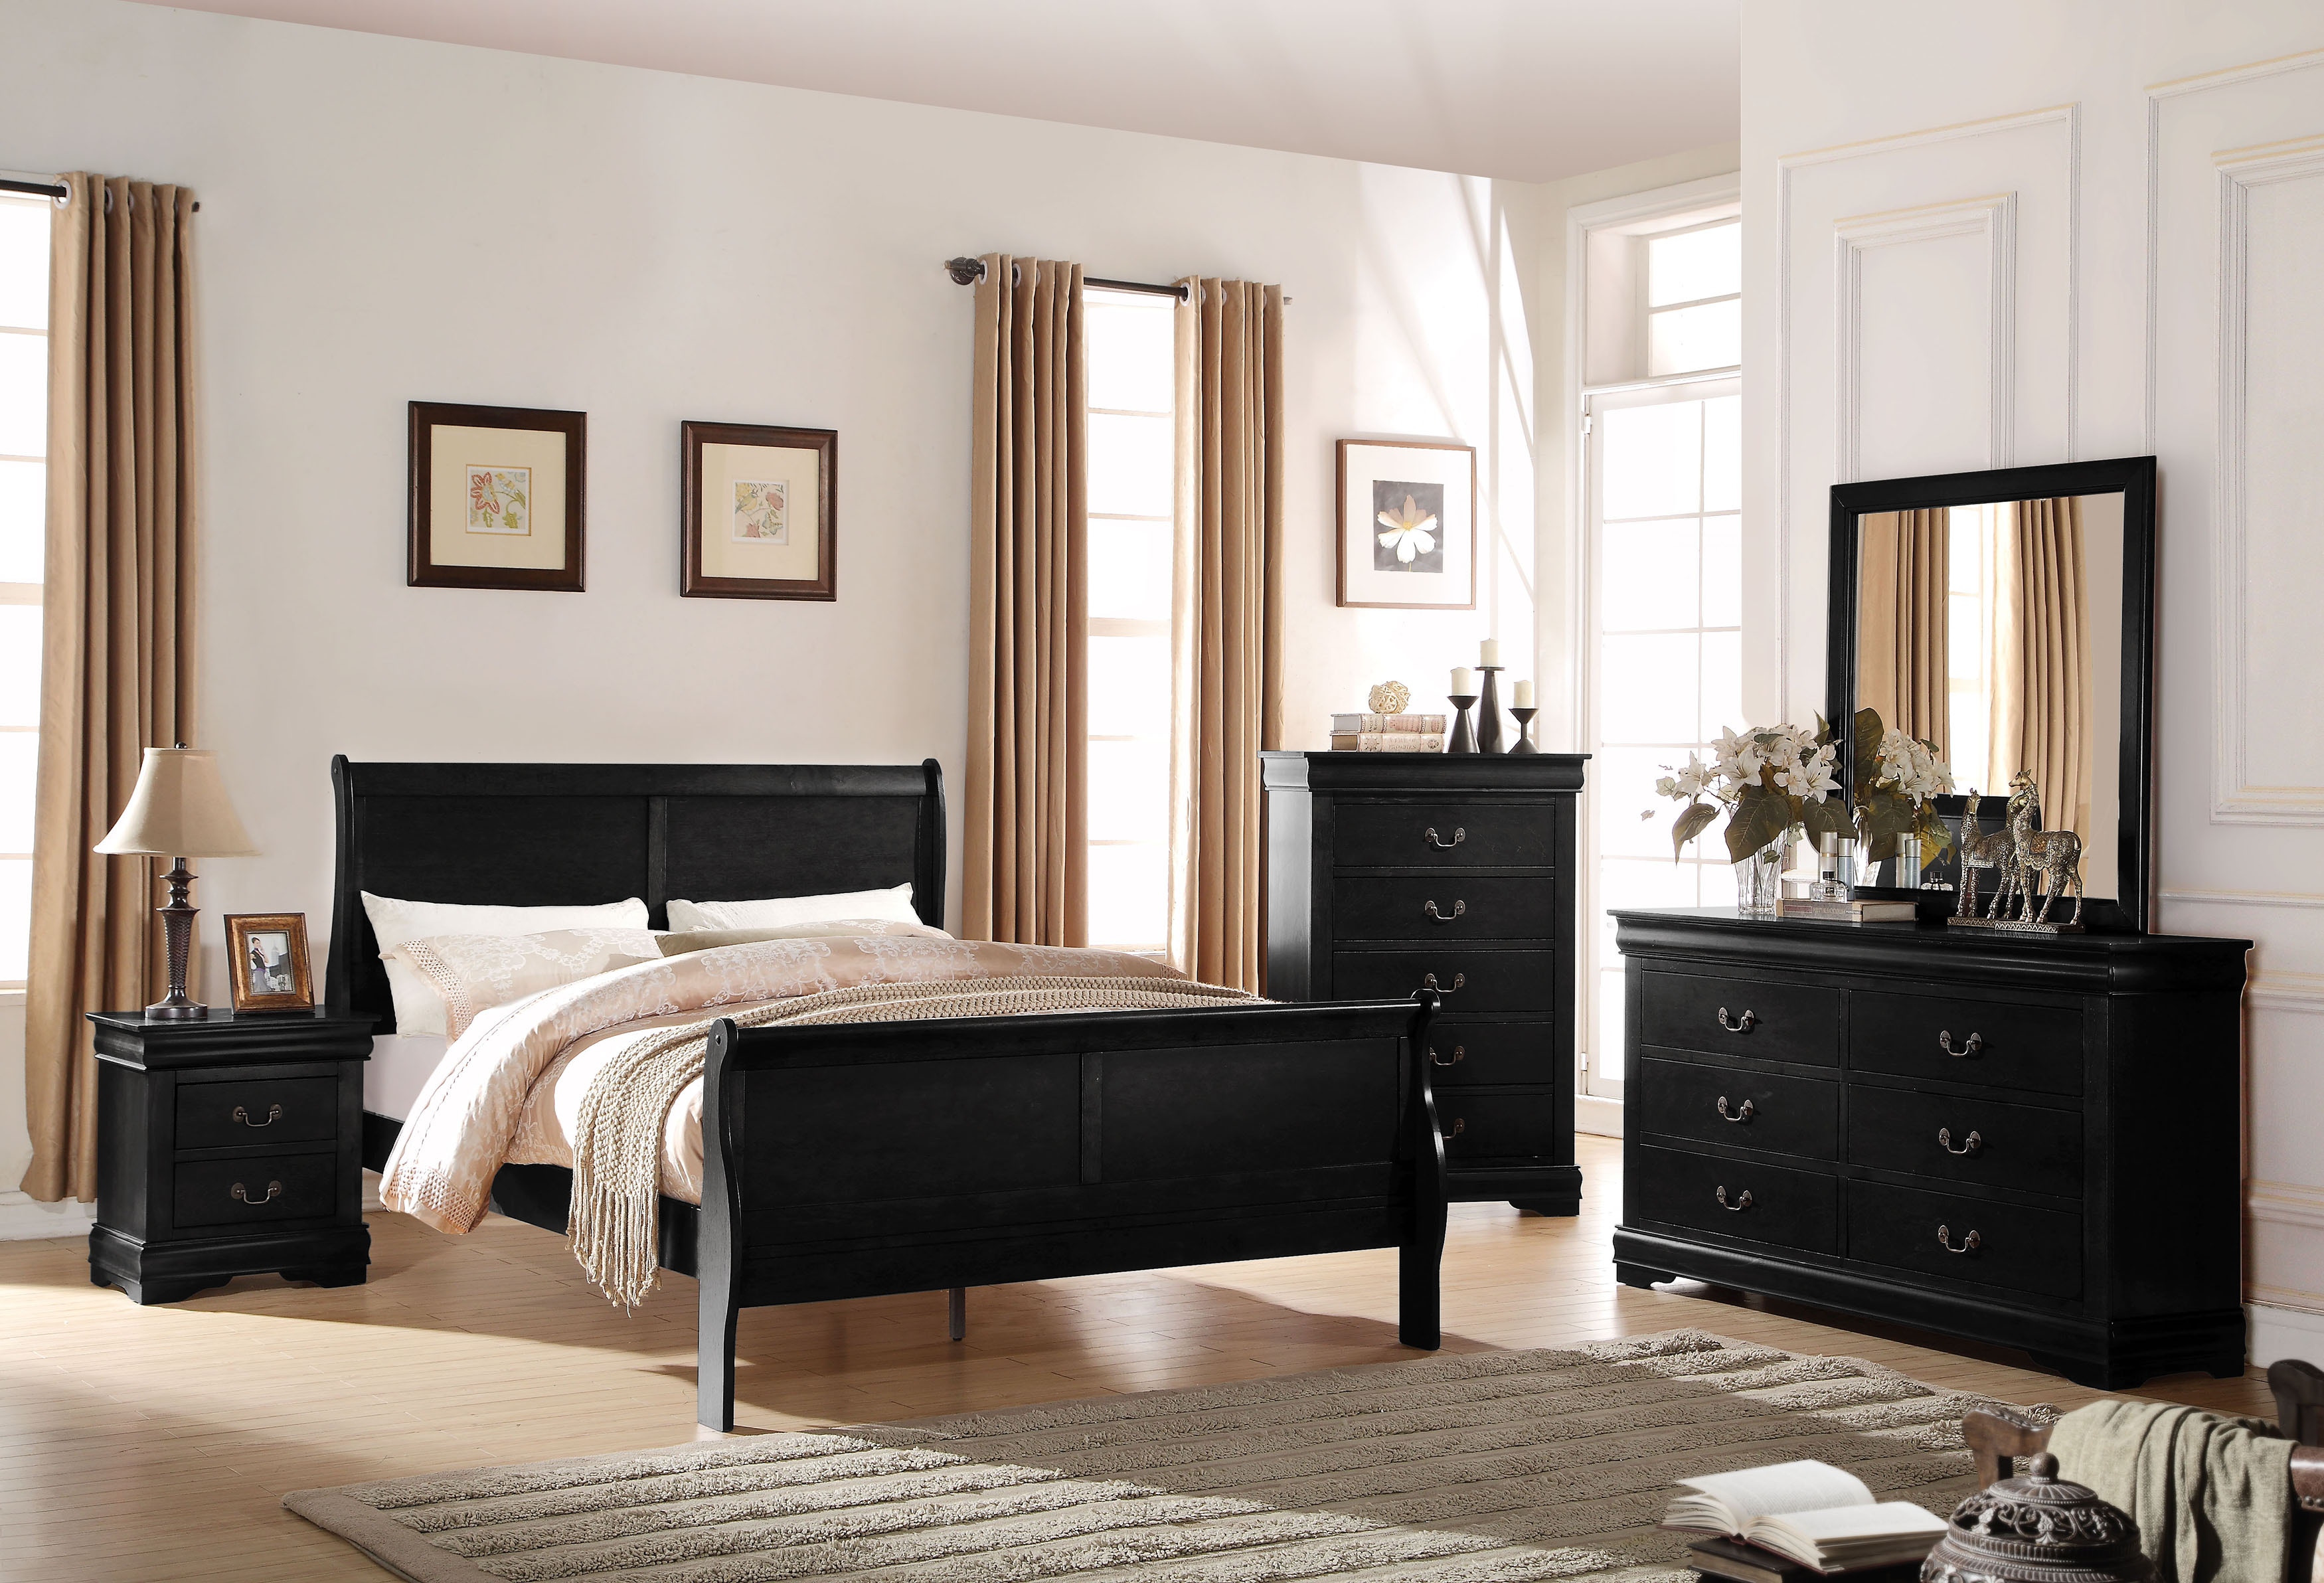 Twin Bed, Black - image 2 of 2